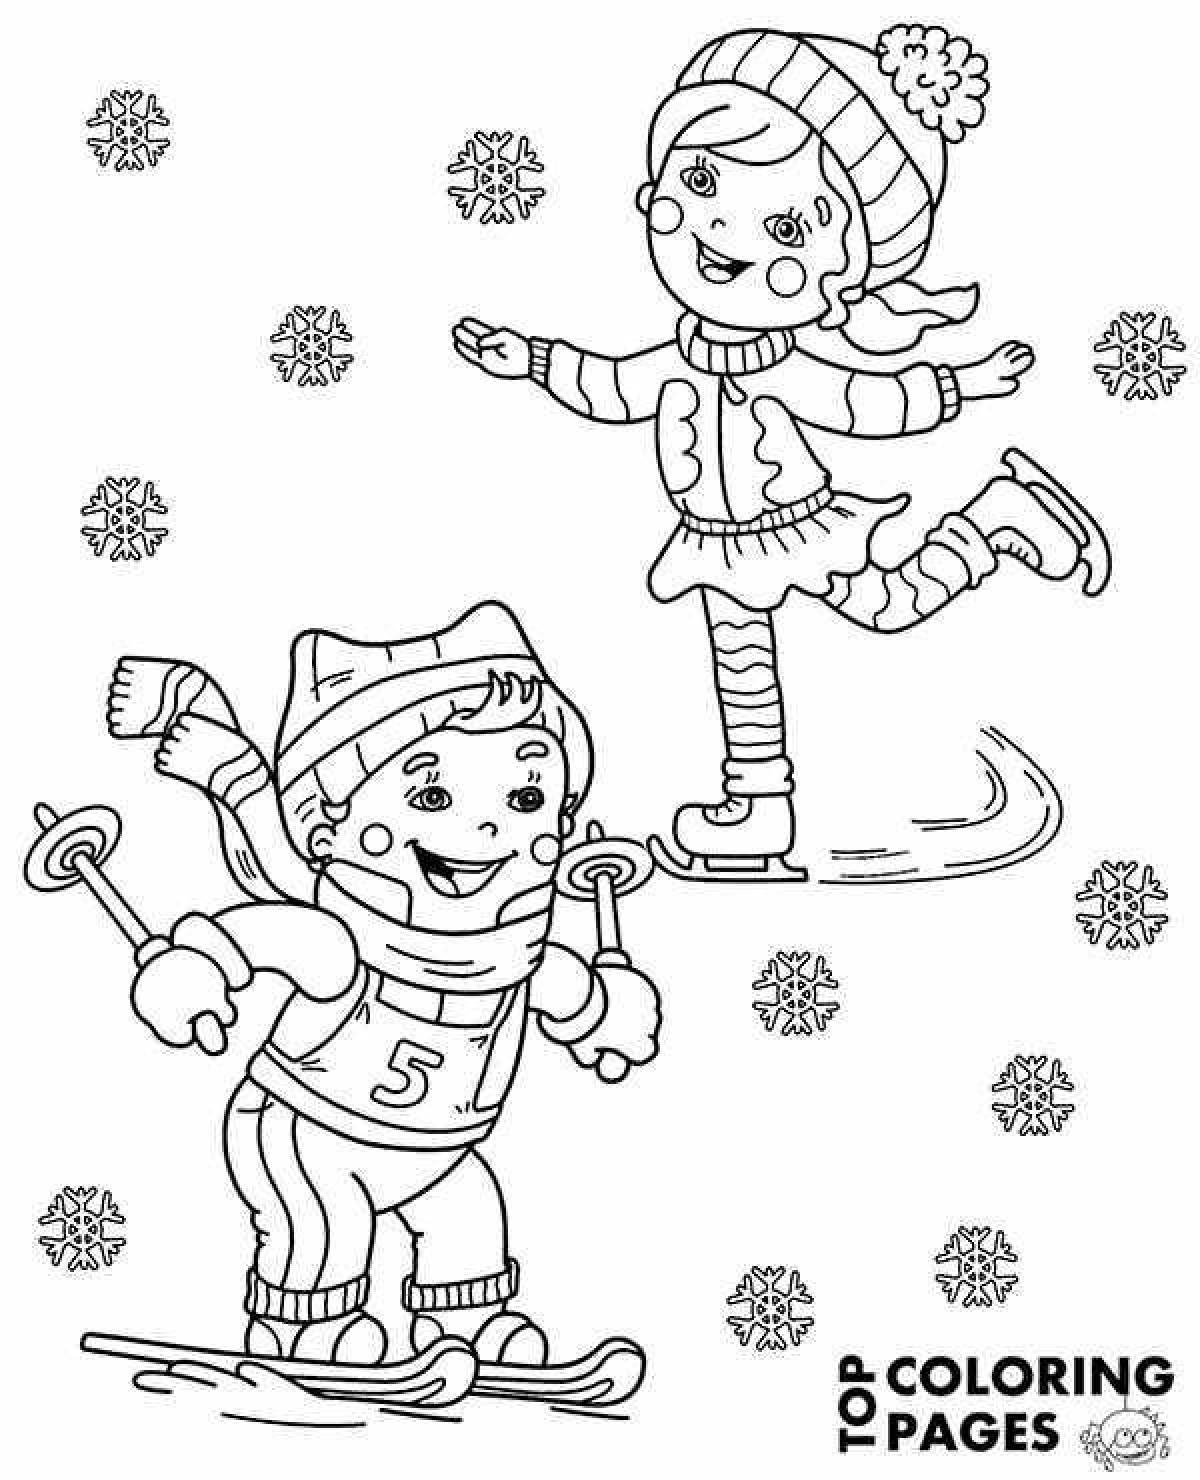 Fascinating winter sports coloring page